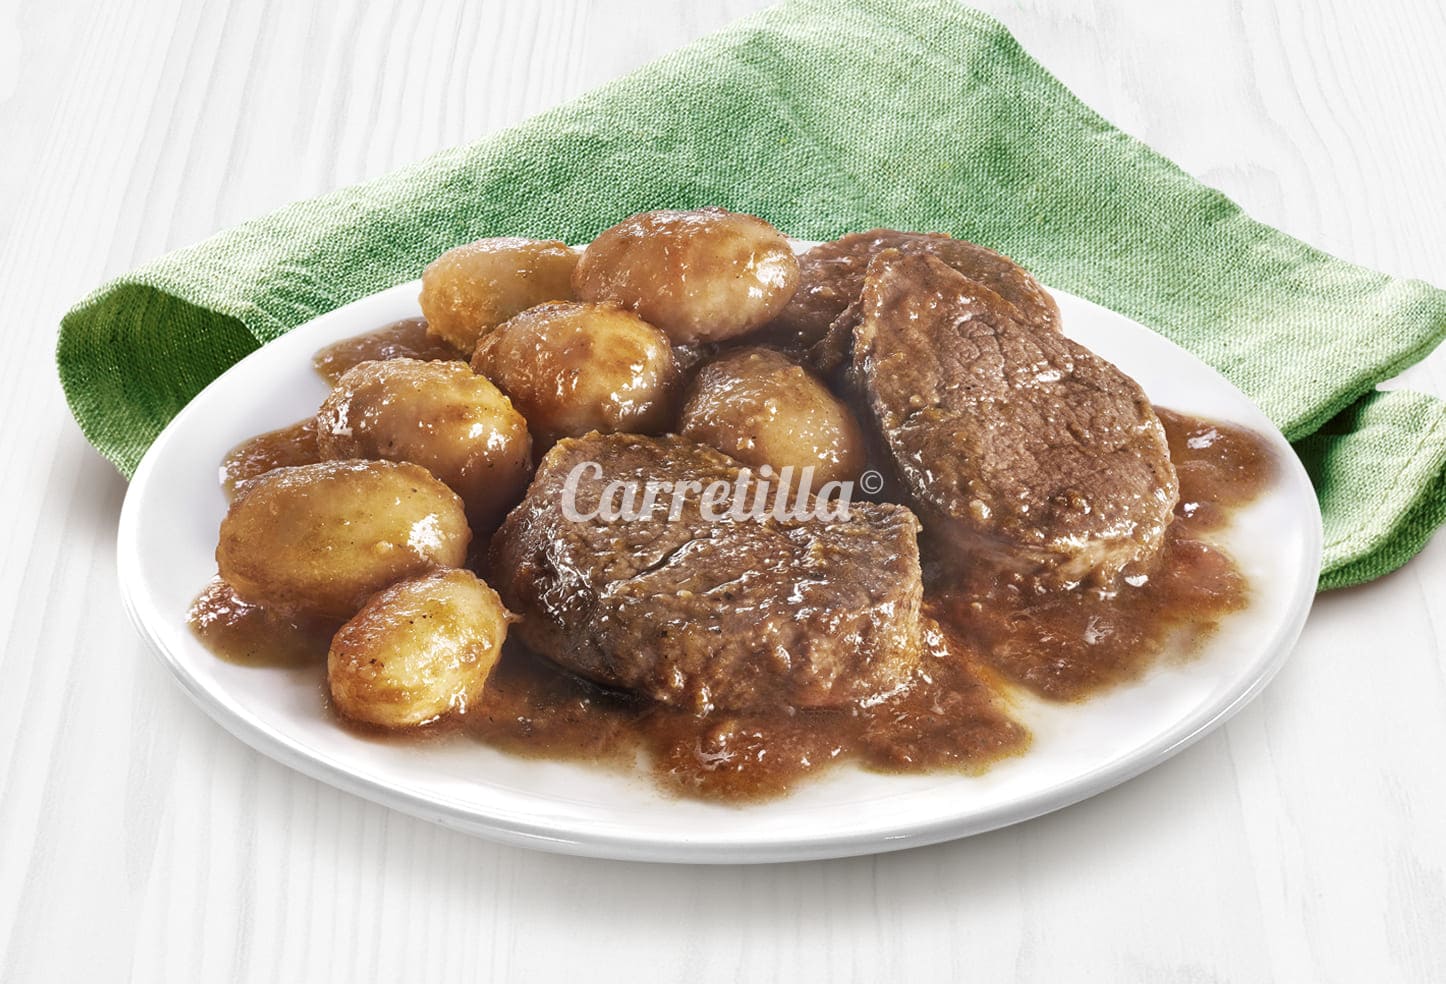 Pork fillet in a Port wine sauce with Parisian Potatoes